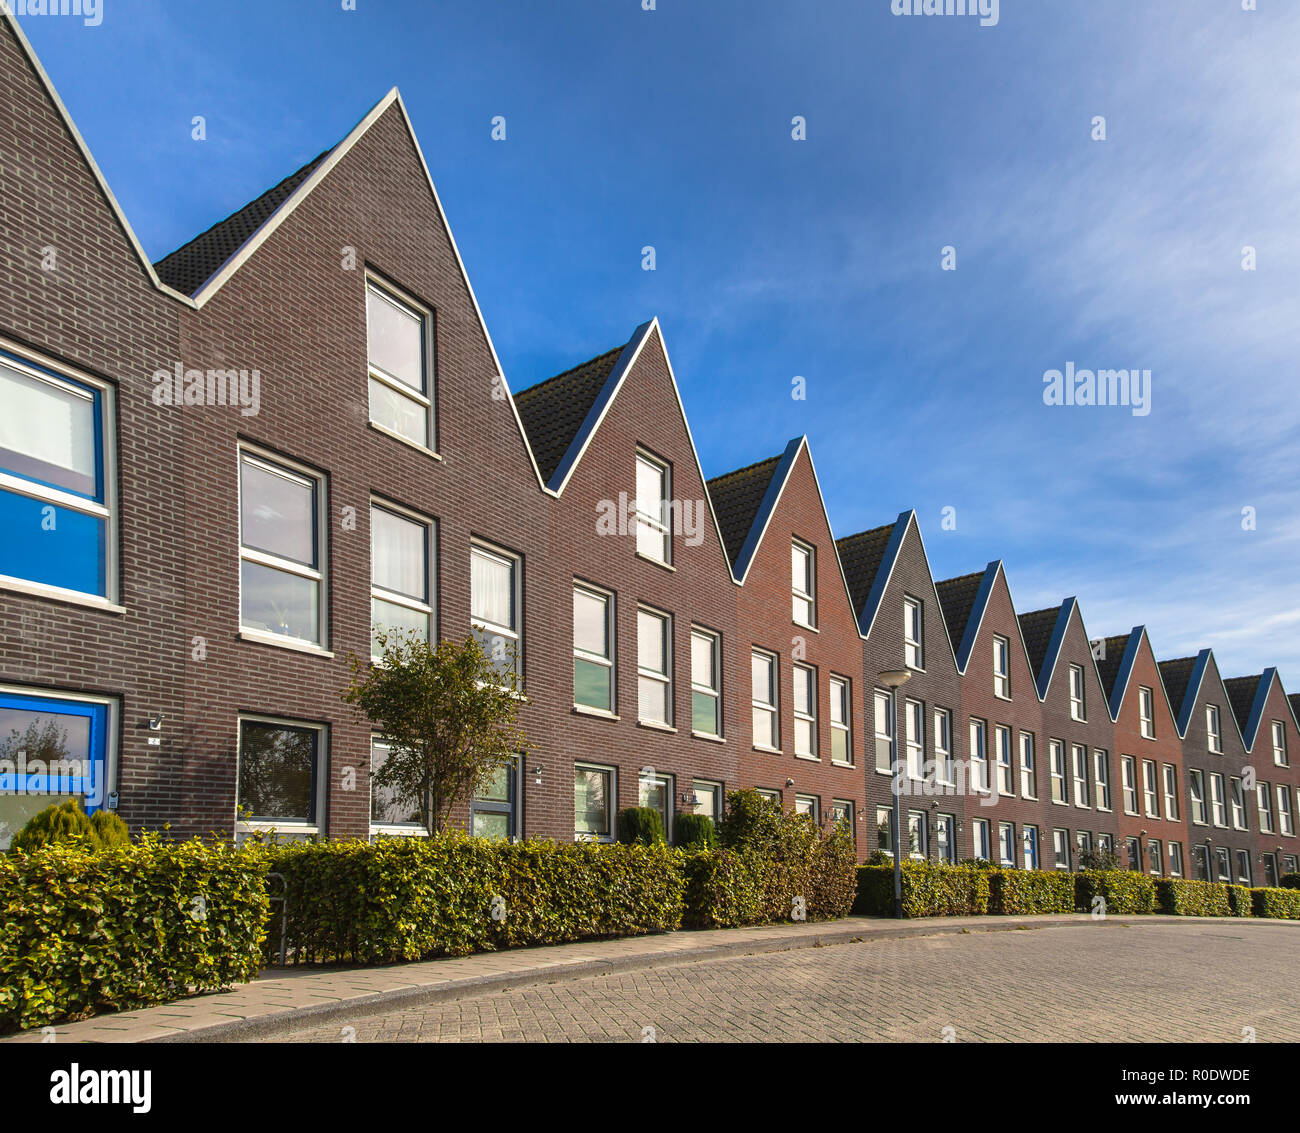 Modern Street with Terraced Real Estate for Families in the Netherlands Stock Photo